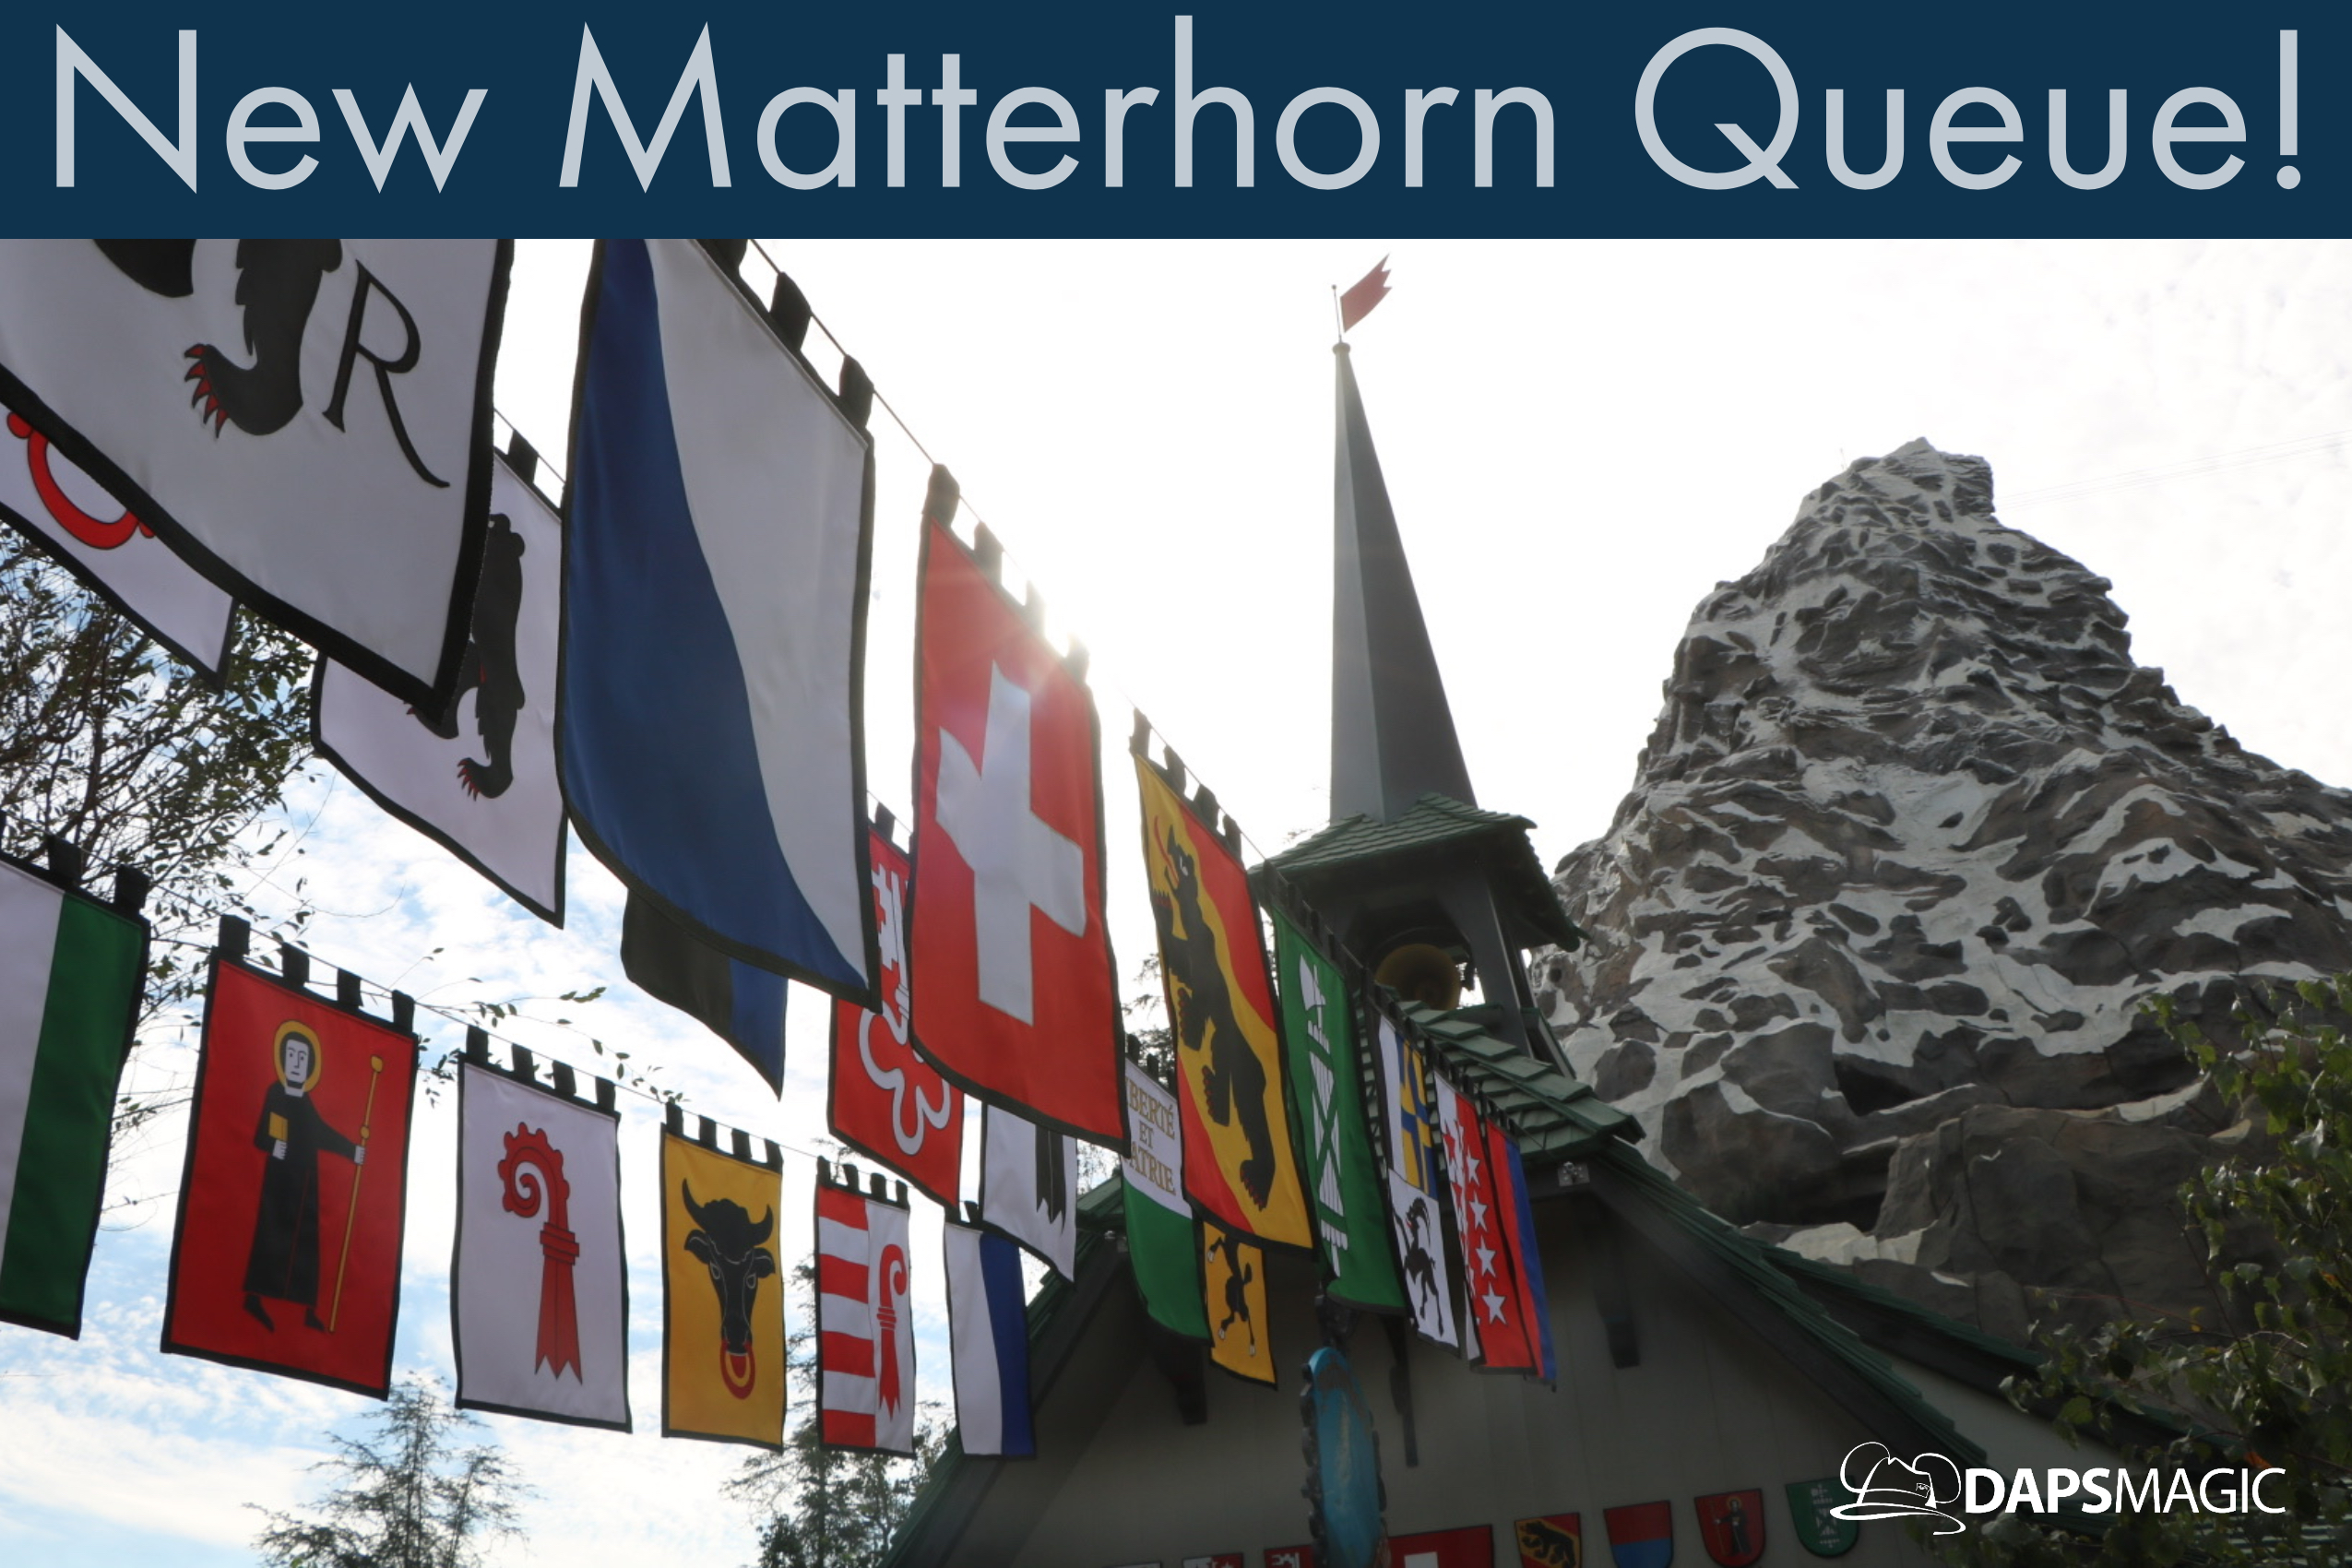 New Matterhorn Queue Adds More Space and More Theming at the Disneyland Resort!